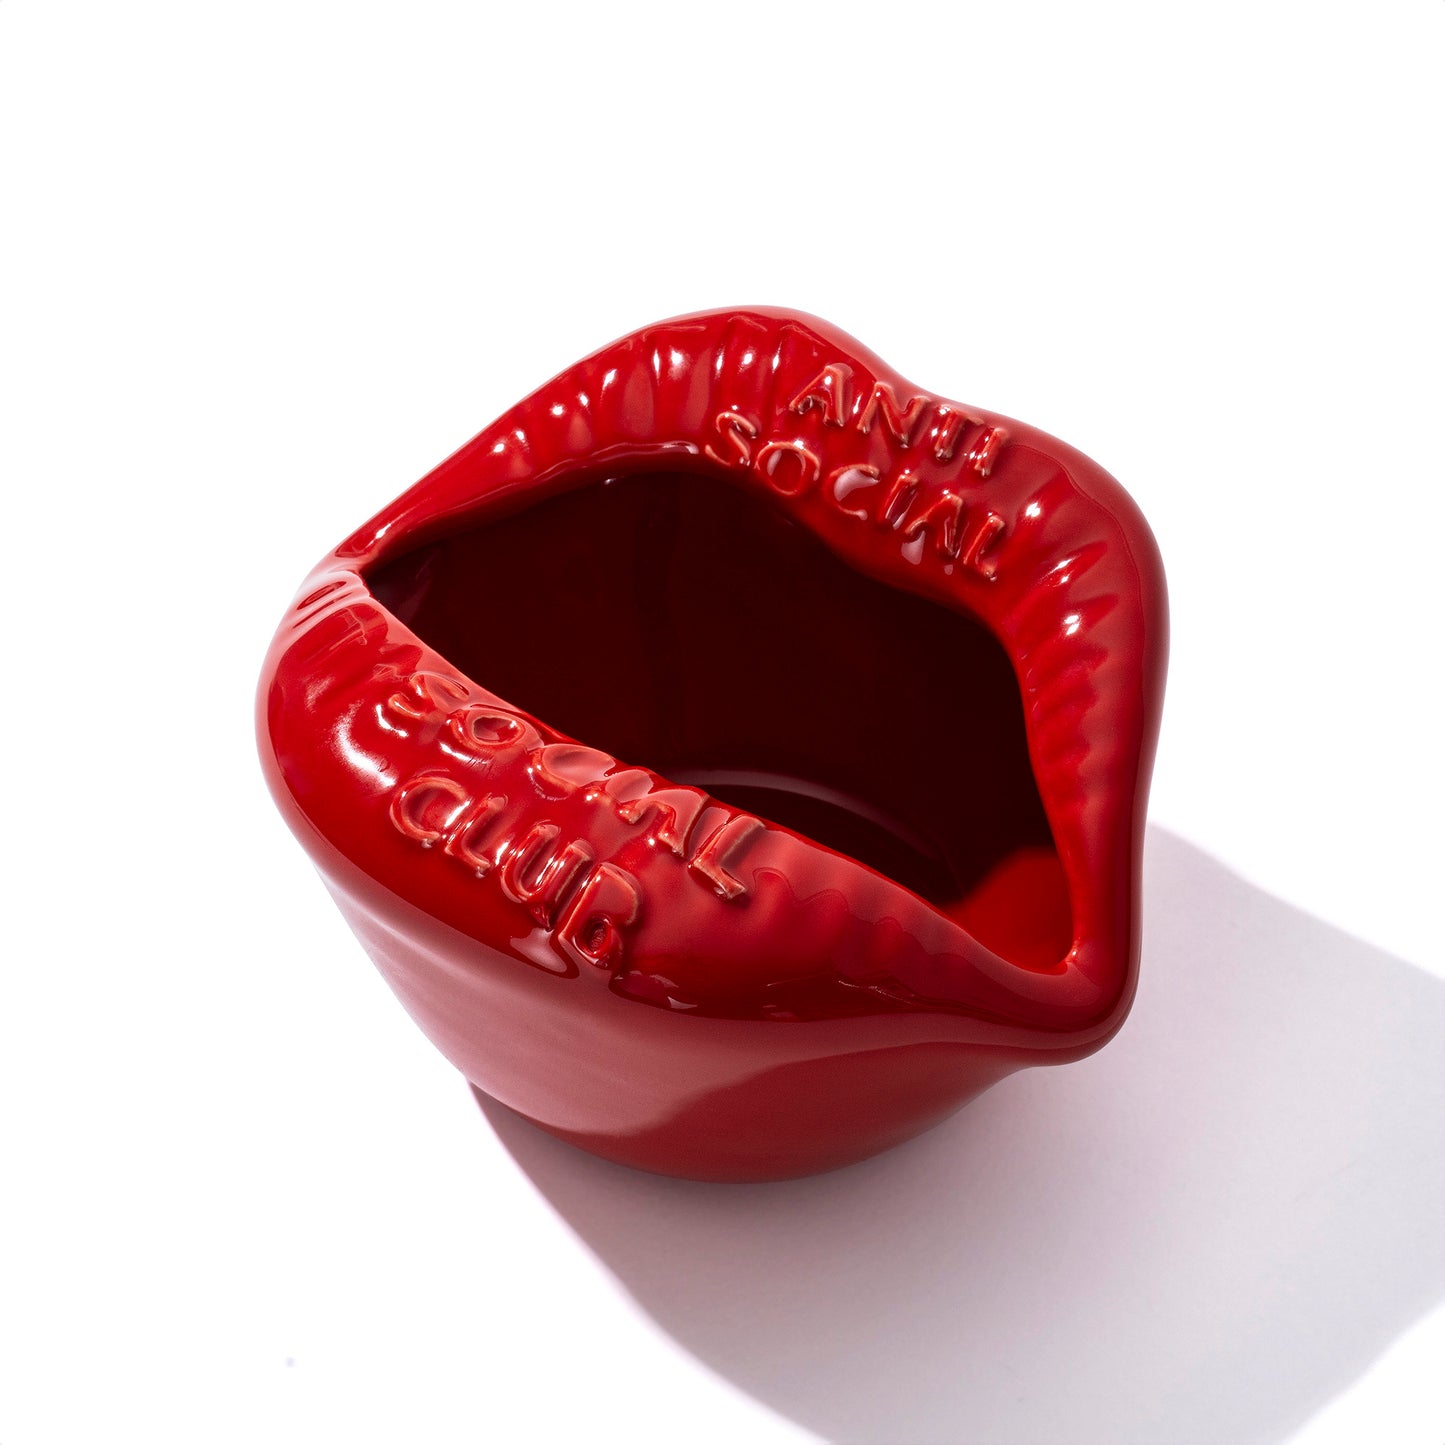 Muse Ashtray - Red